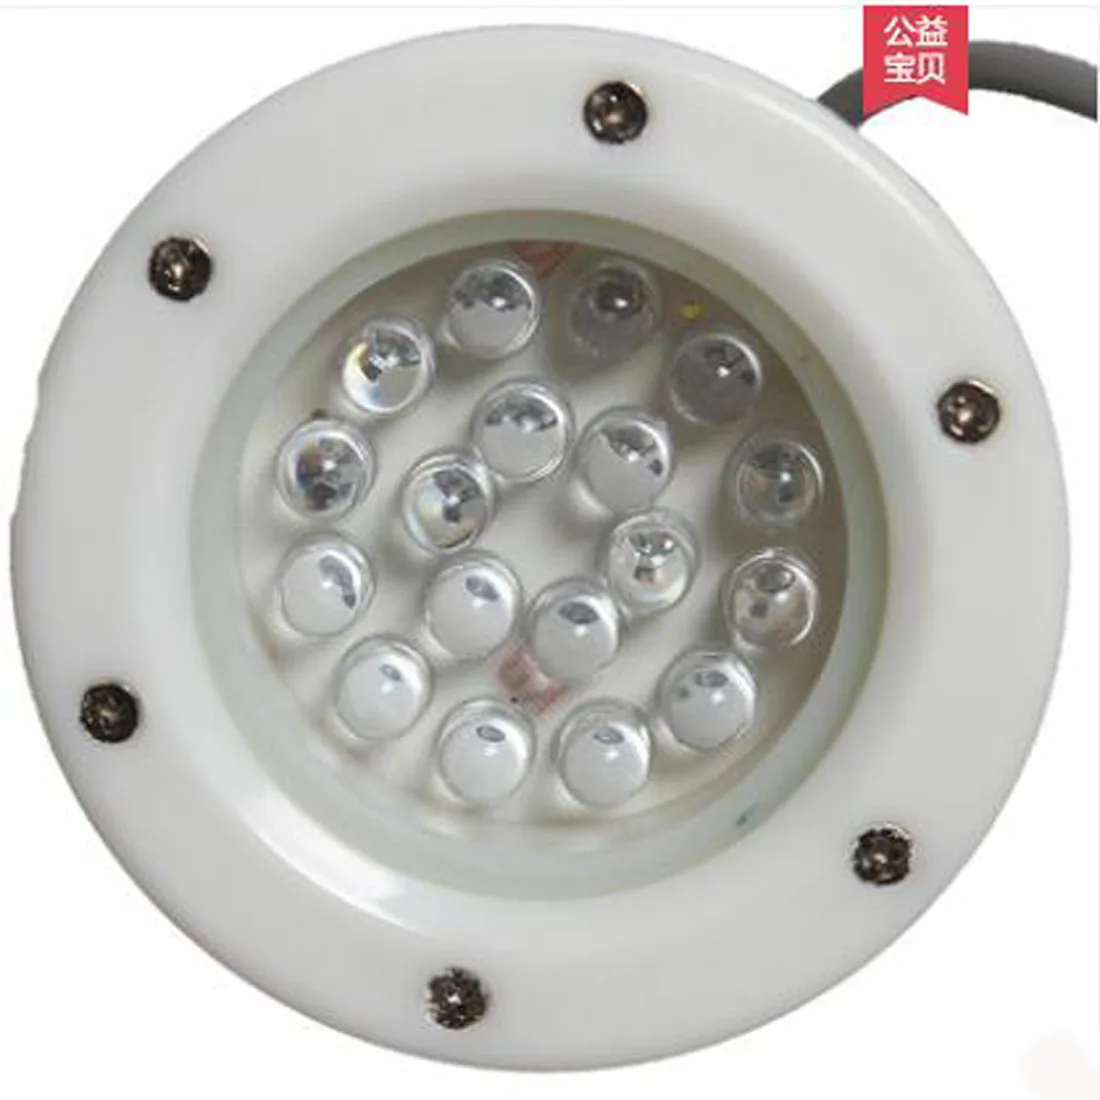 

Fountain LED underwater lamp waterproof landscape courtyard Yongquan hole lamp low voltage 24V colorful monochrome 220V high vol